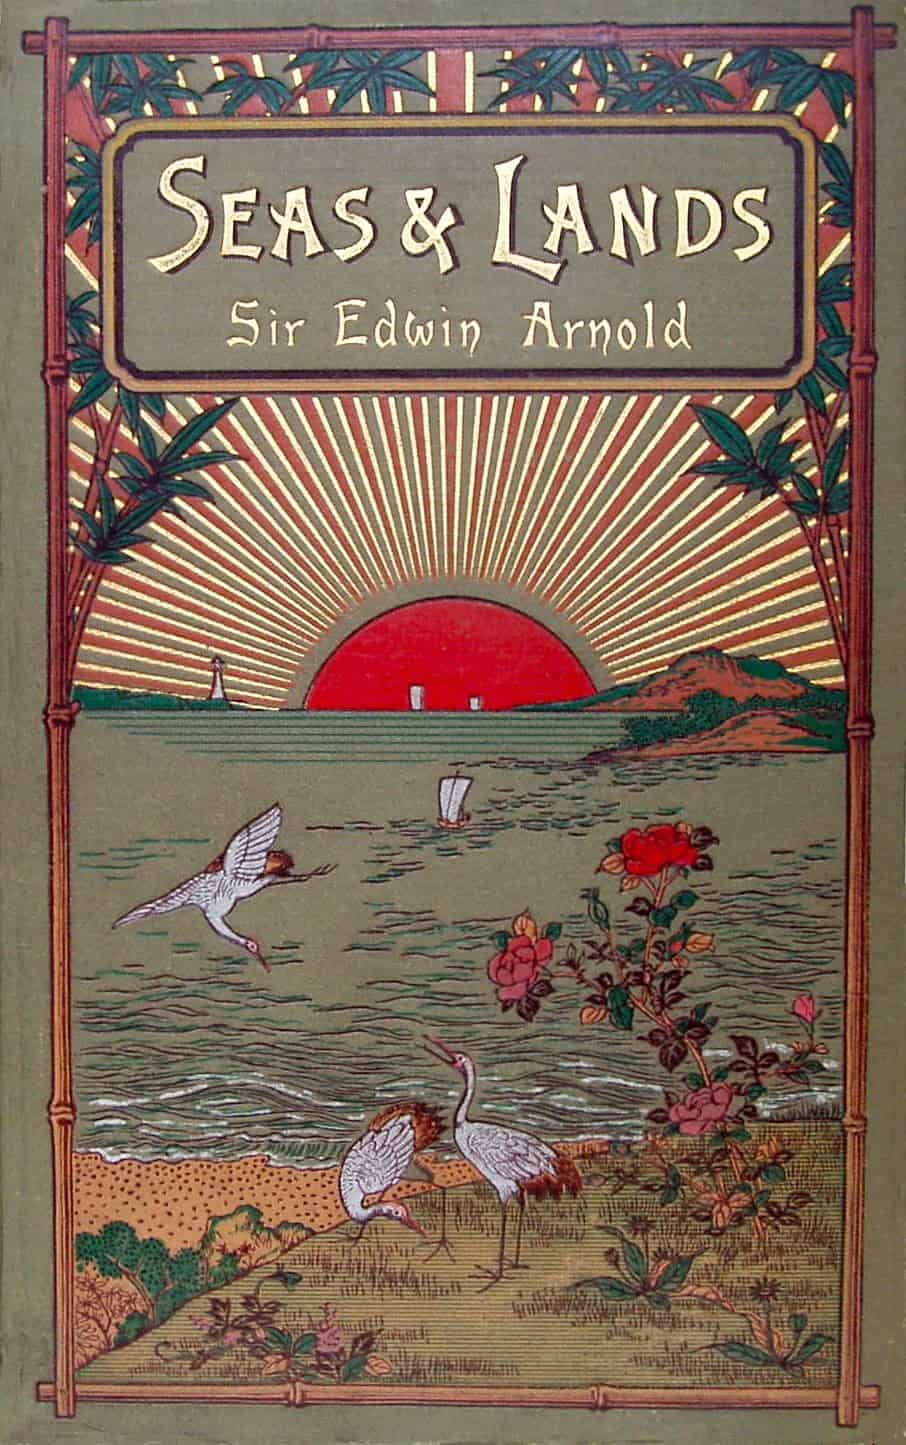 Seas and Lands by Sir Edwin Arnold, London 1891